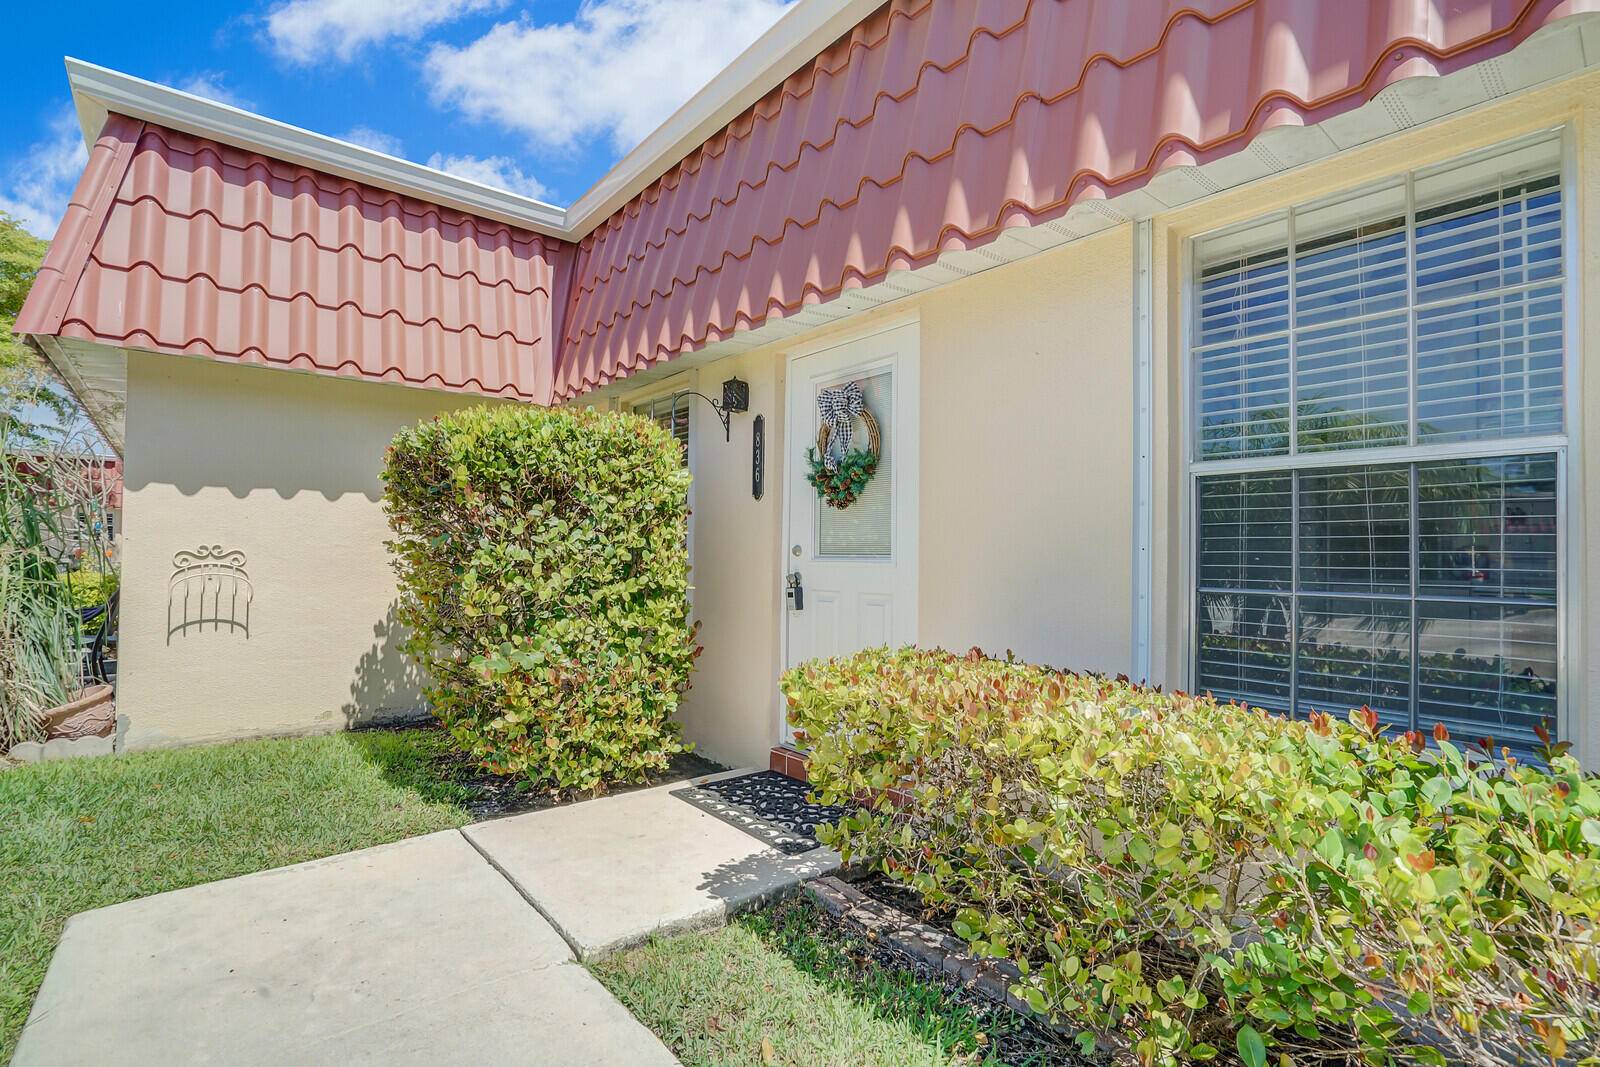 Bring a good book and enjoy this totally tranquil condo with a private lanai and patio.